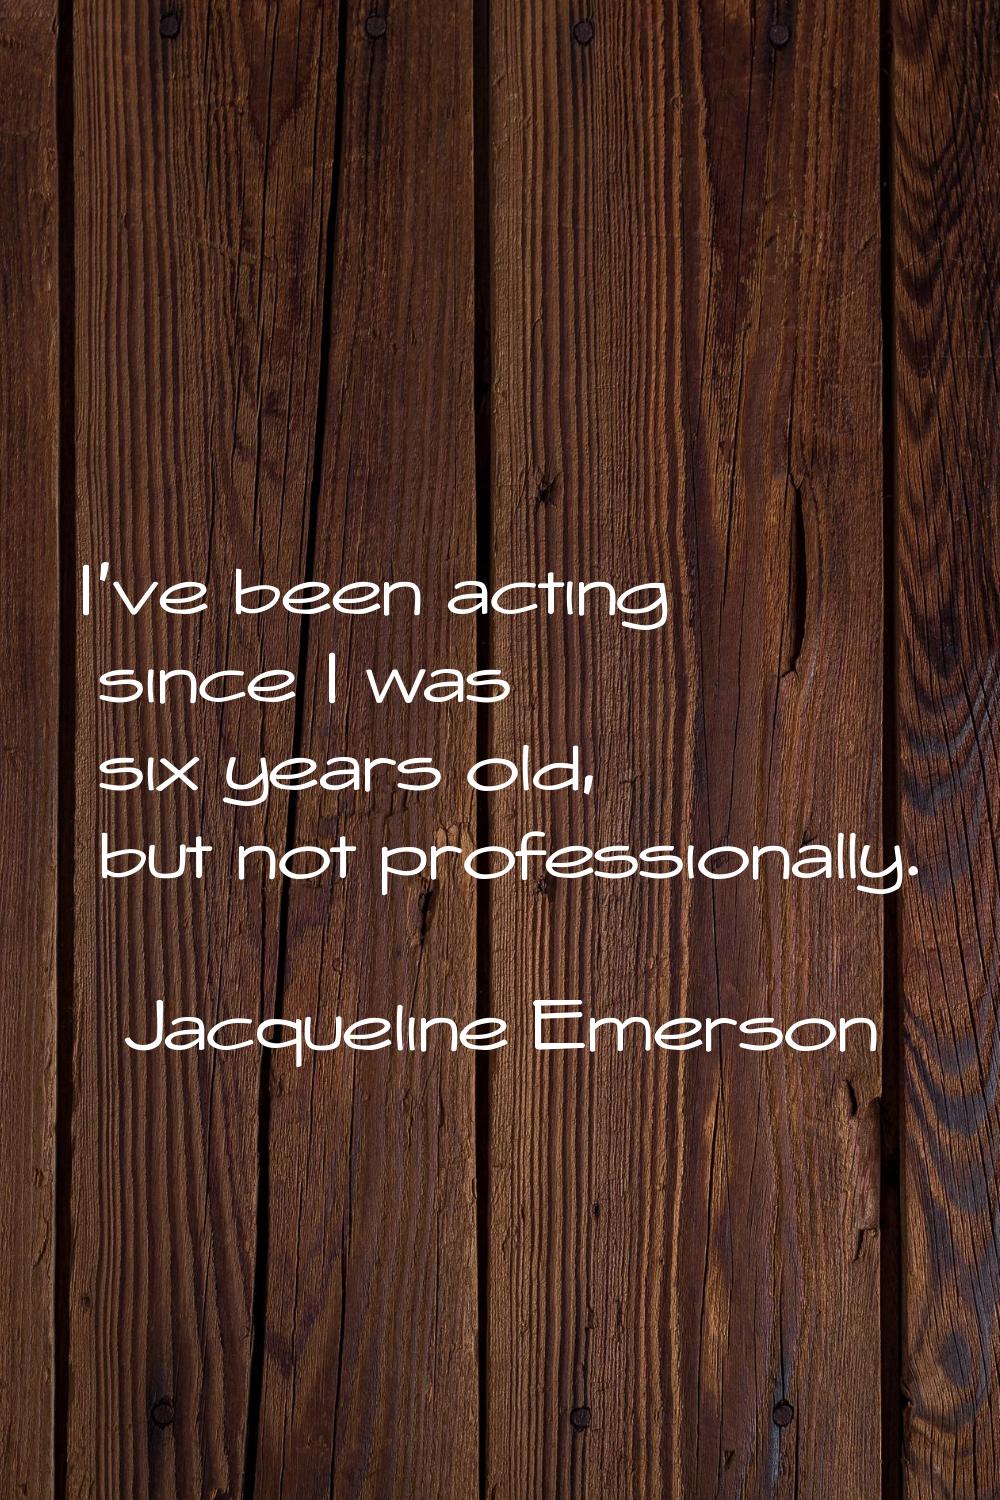 I've been acting since I was six years old, but not professionally.